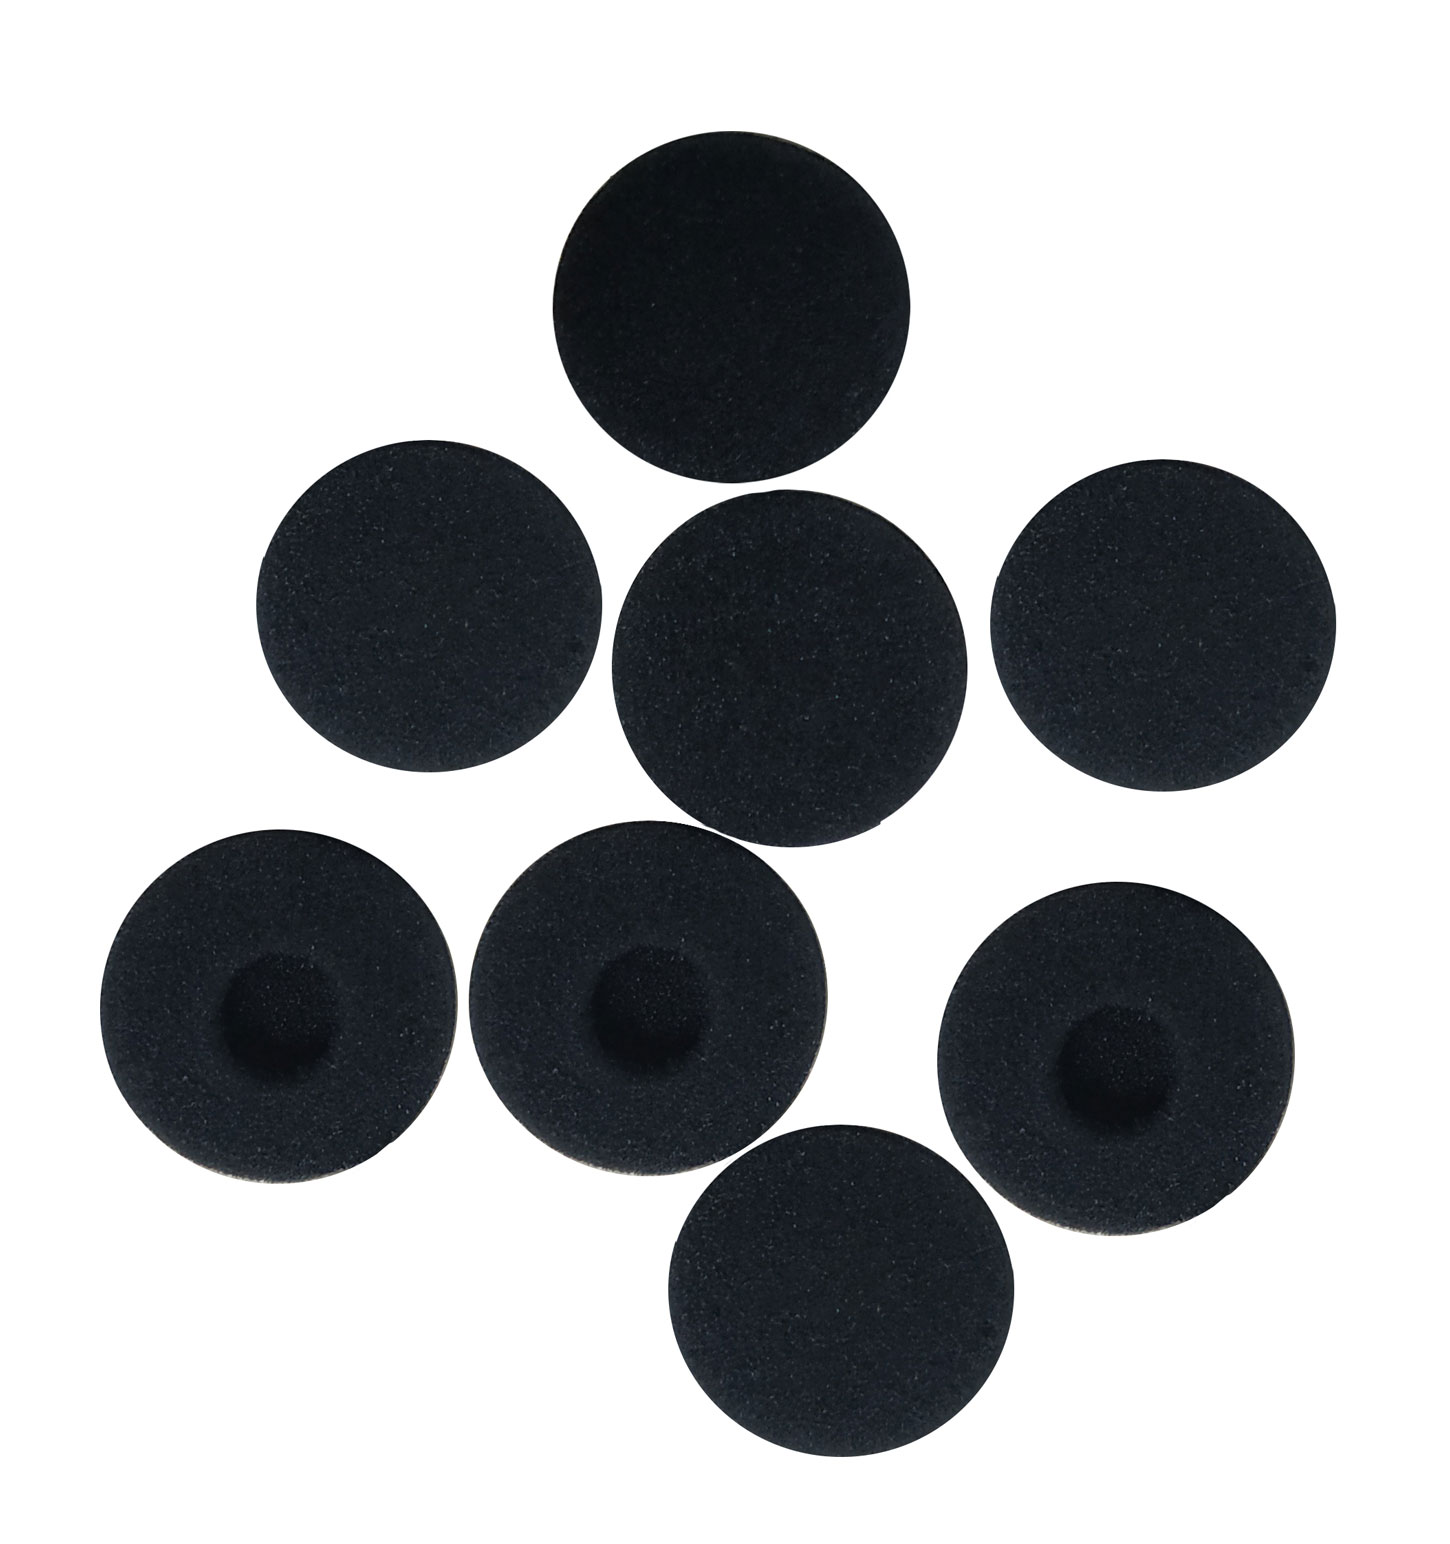 HPA 1313T Sponges Replacement Set